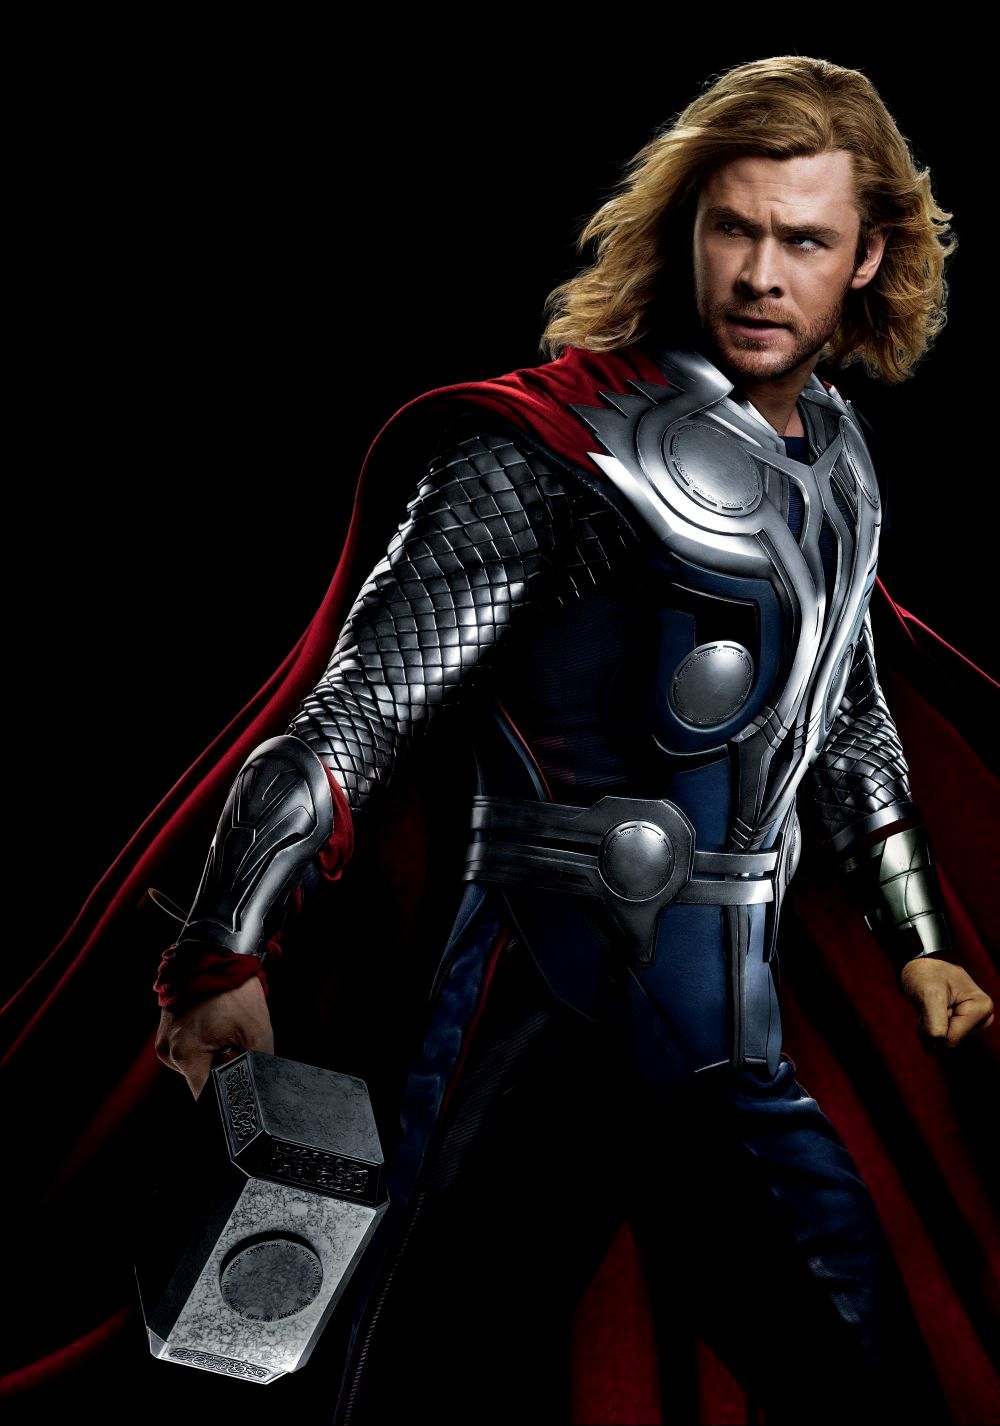 Thor Movie Poster - ID: 139938 - Image Abyss